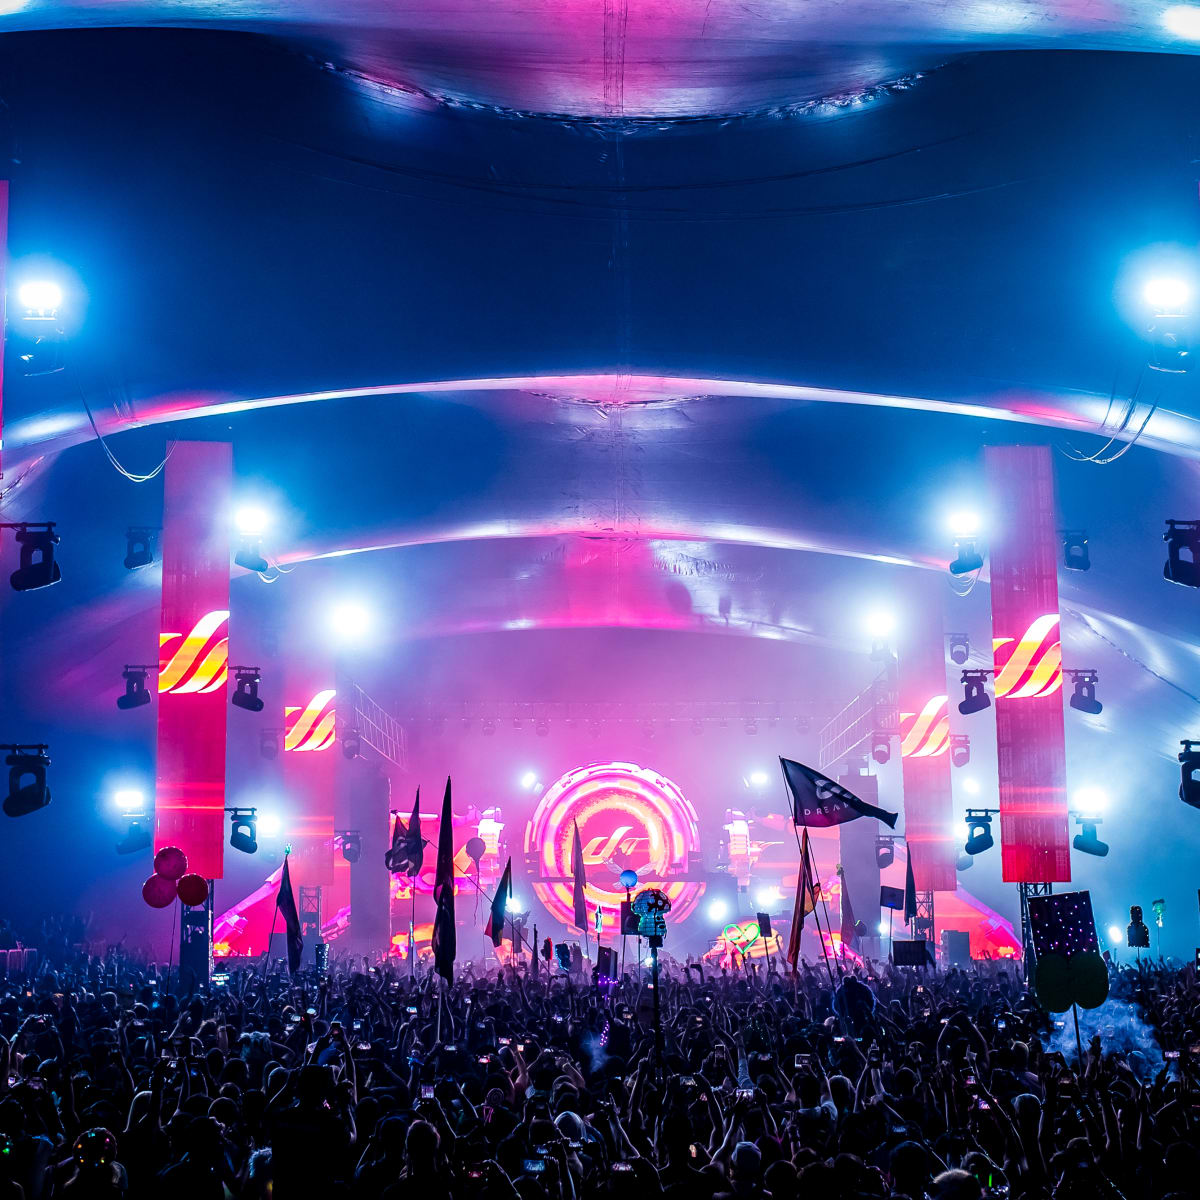 Dreamstate SoCal 2021: Set Times, COVID-19 Guidelines, and